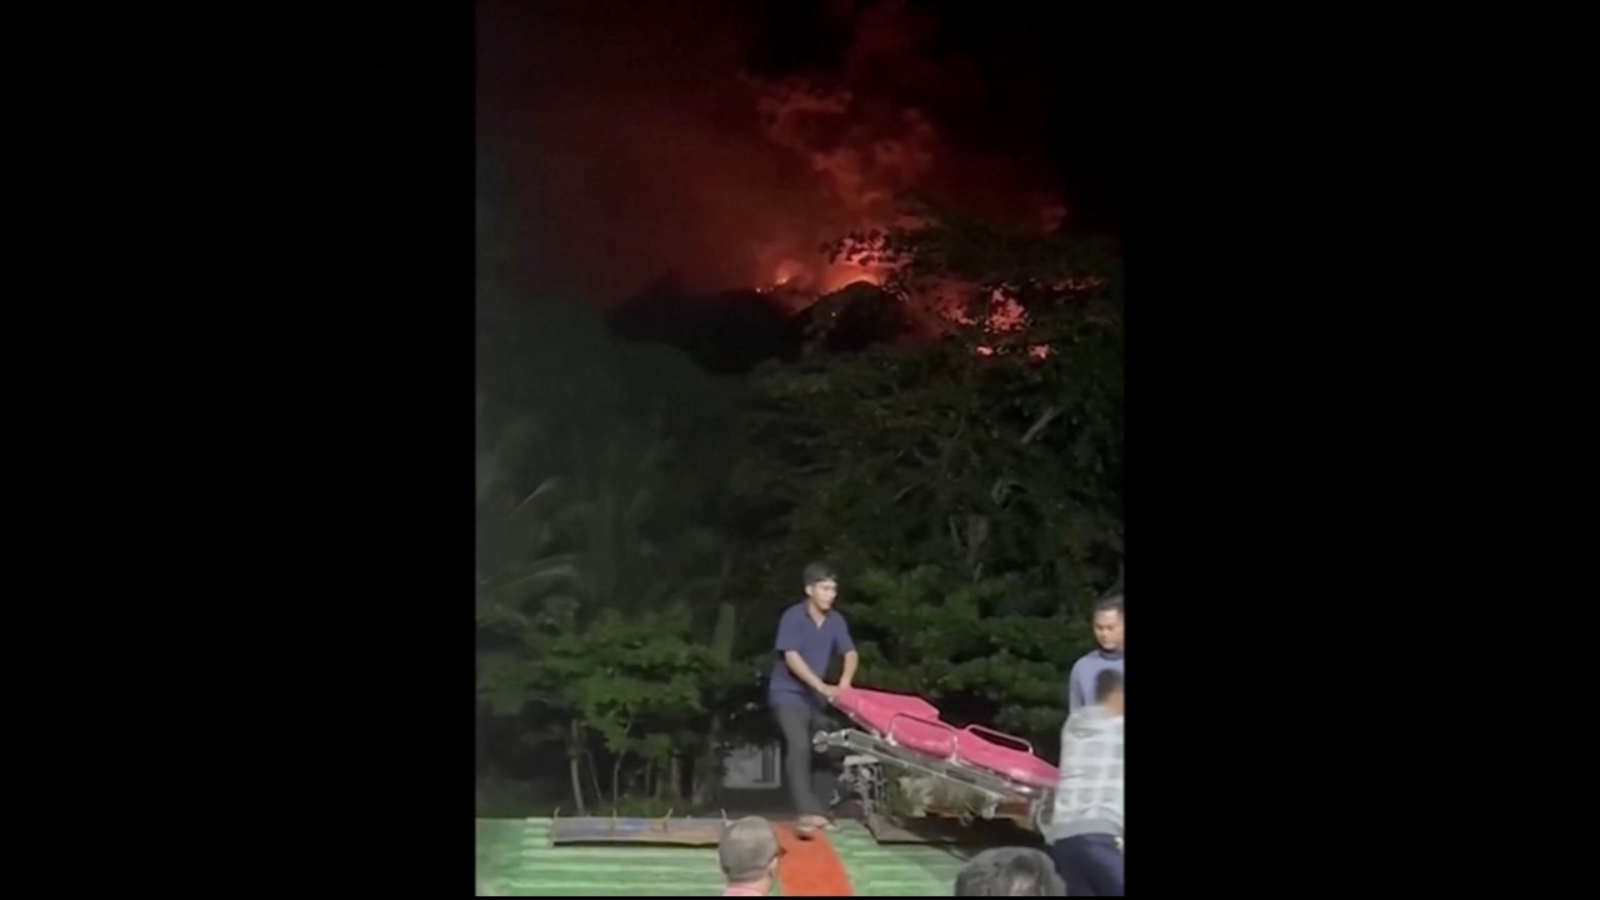 Indonesia issues tsunami alert as Mount Ruang volcano erupts on remote island [Video]